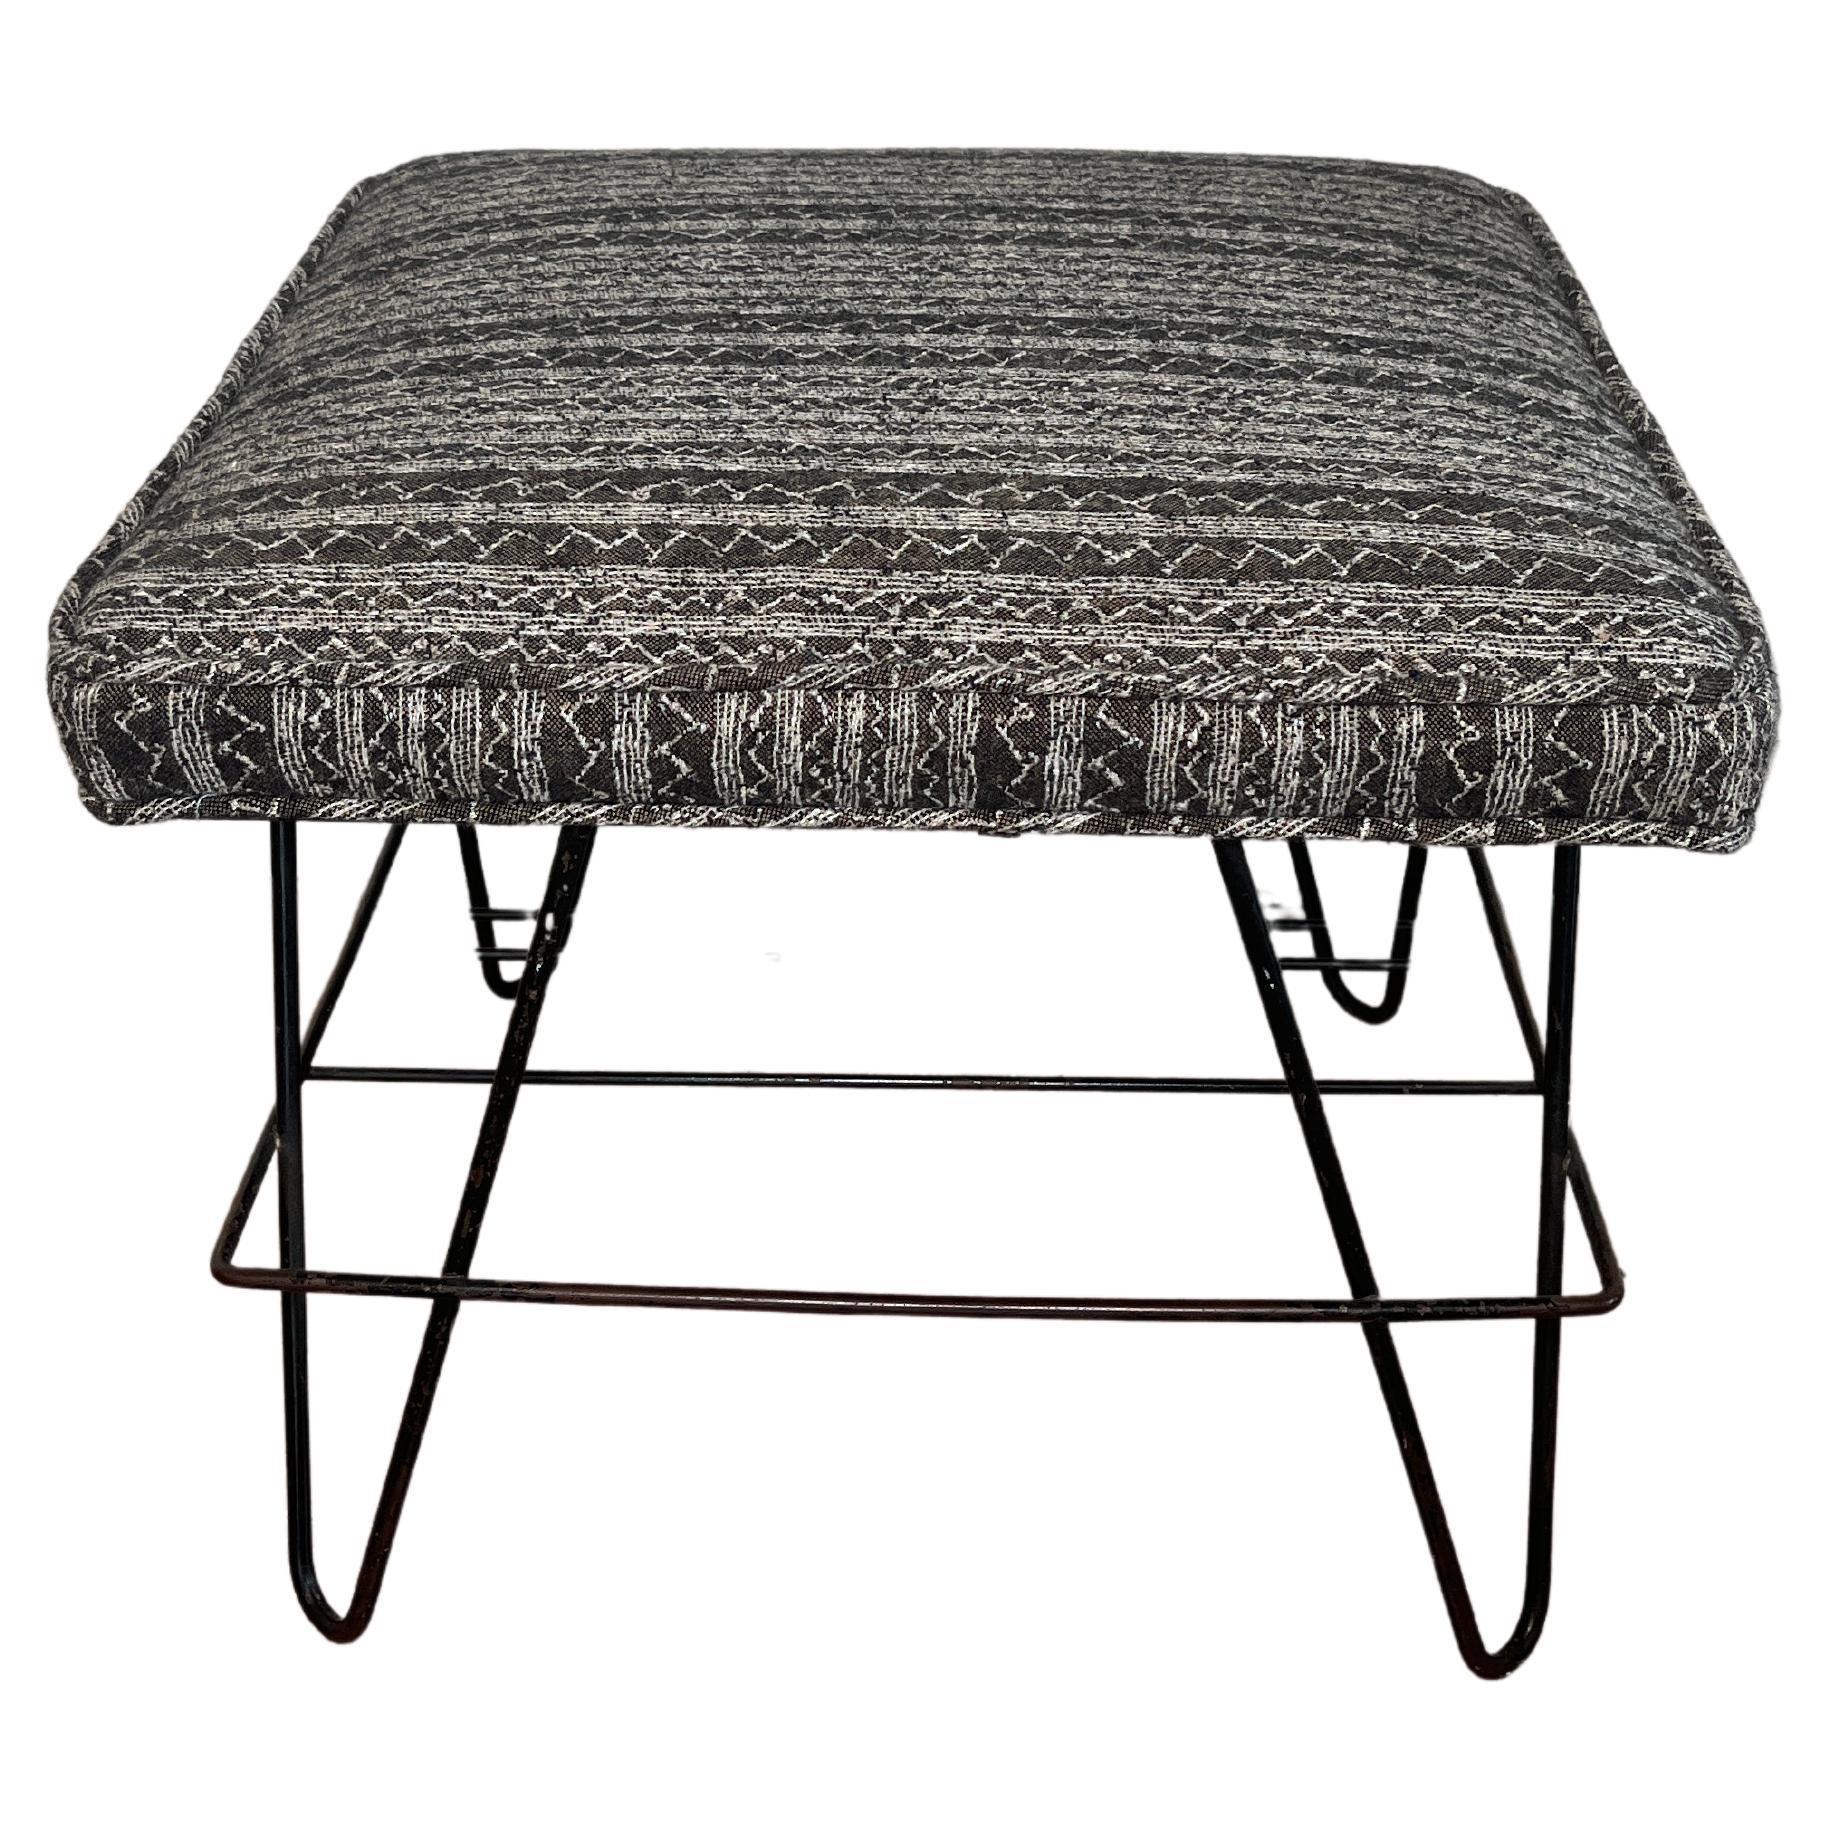 Midcentury French Iron Ottoman with Hairpin Legs and Upholstered Top